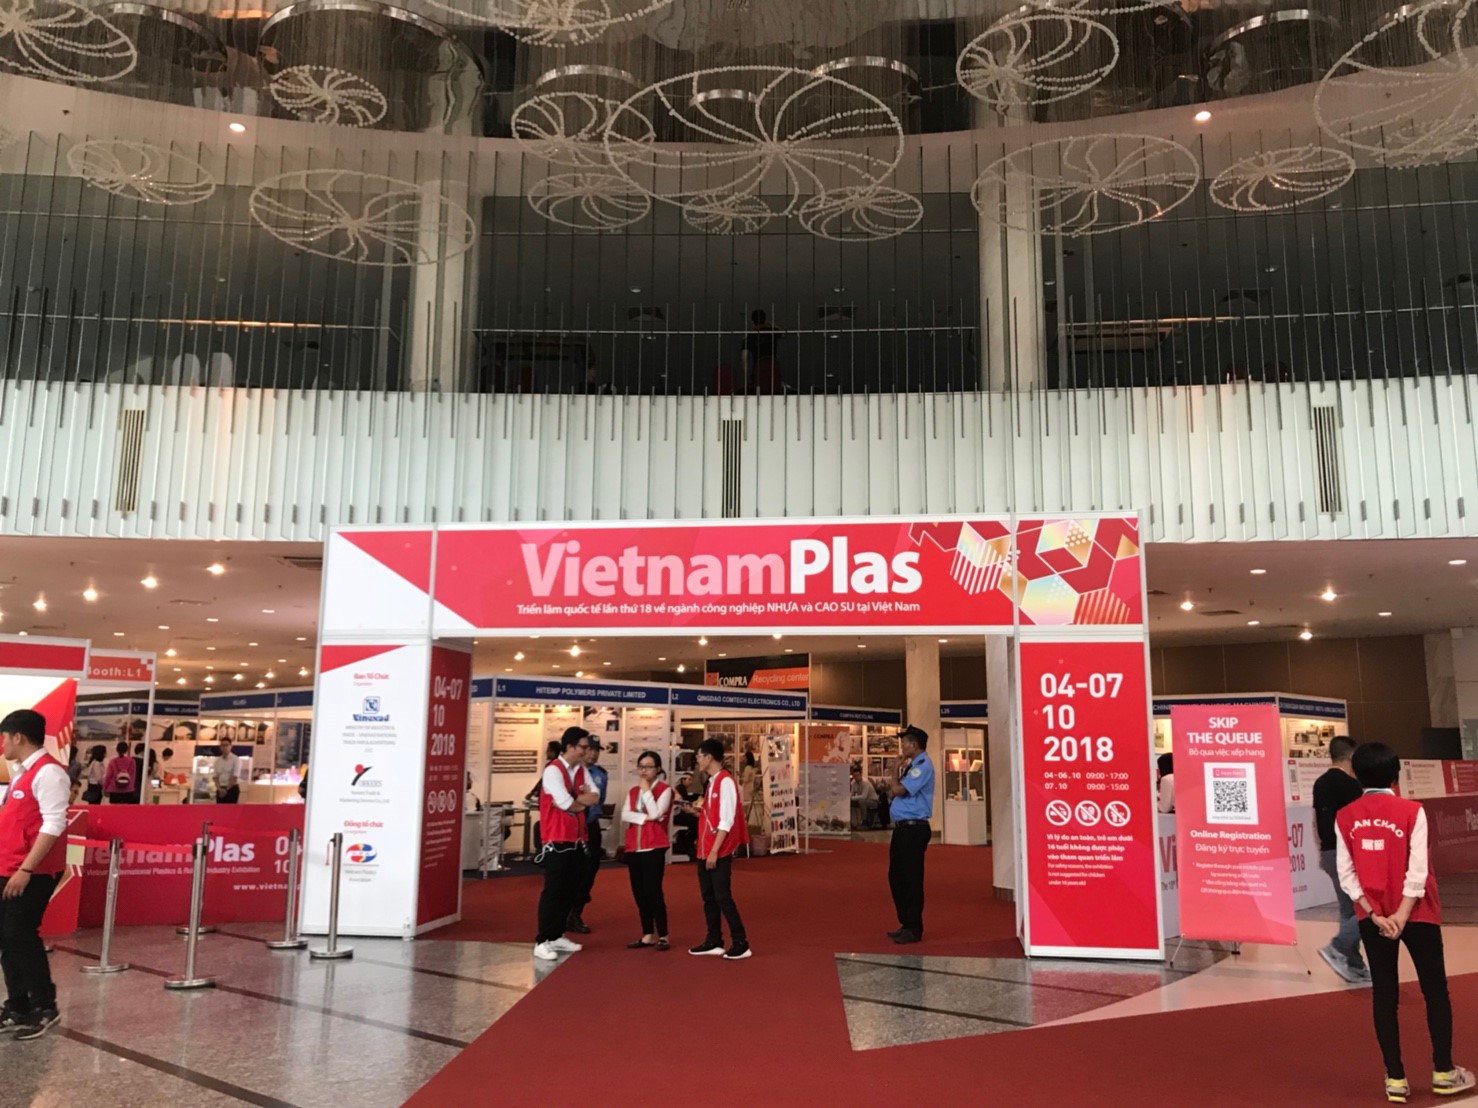 Ho Hsiang Ching Co.,Ltd (TPE/TPR) participate 2018 Vietnam Plas finished perfectly.